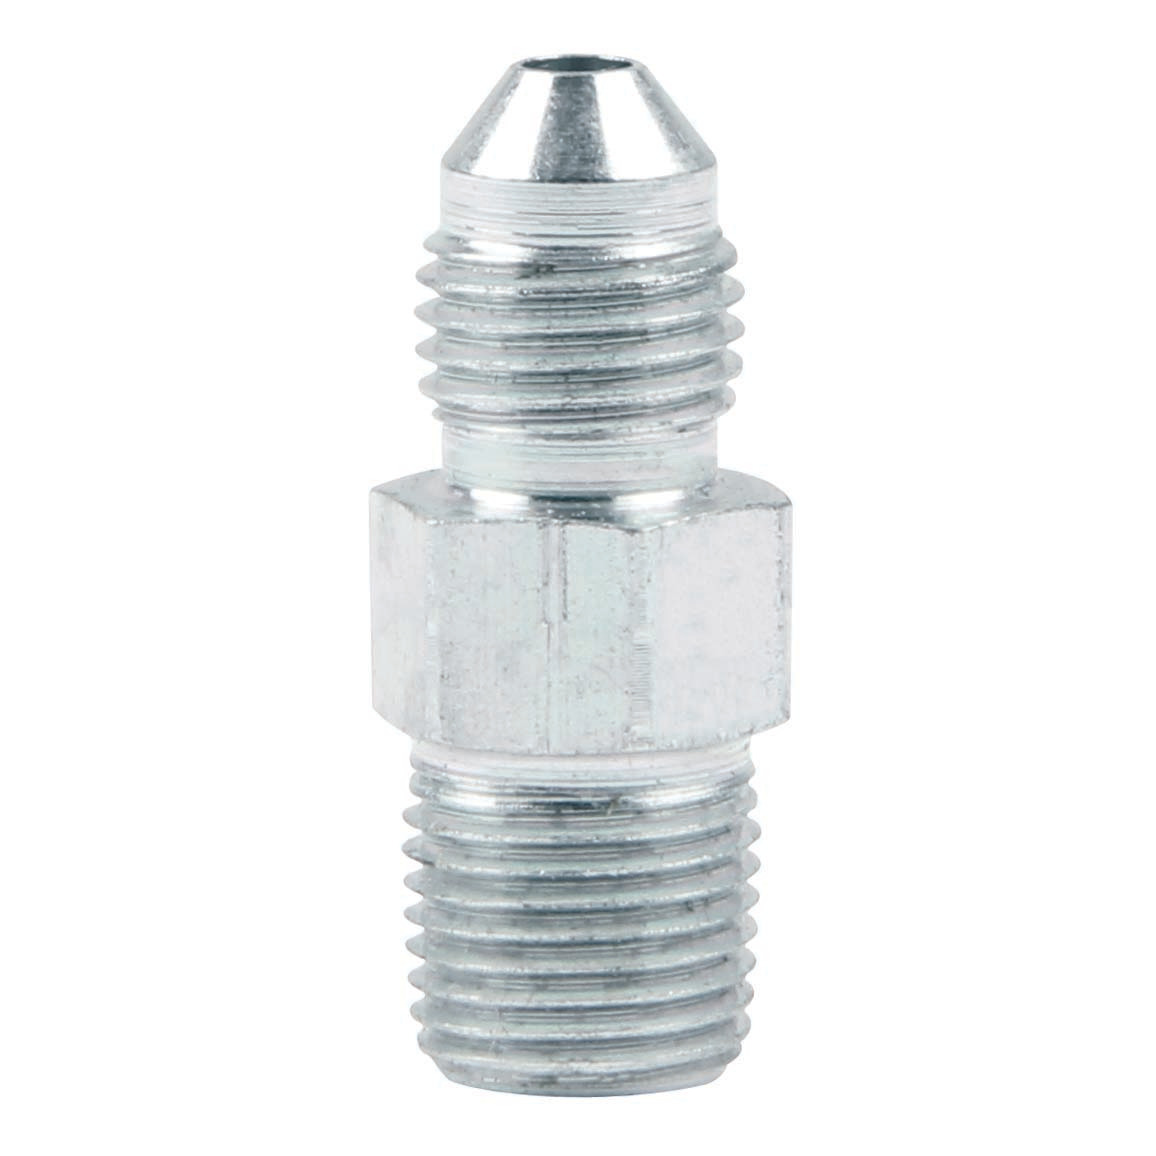 Adapter Fittings -3 to 1/8 NPT 2pk - 50000